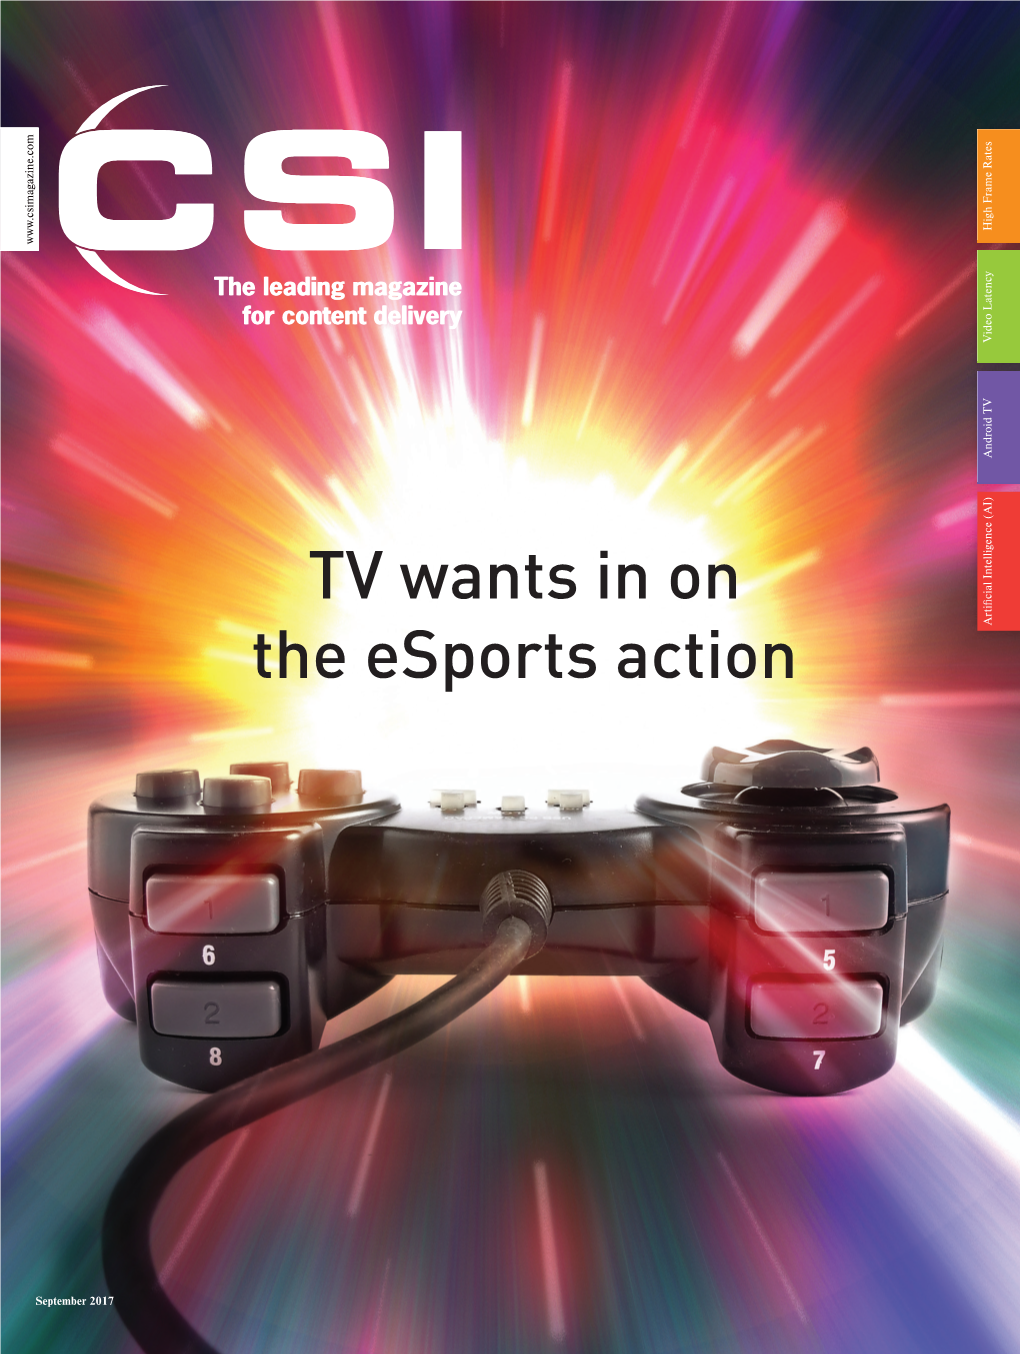 TV Wants in on the Esports Action